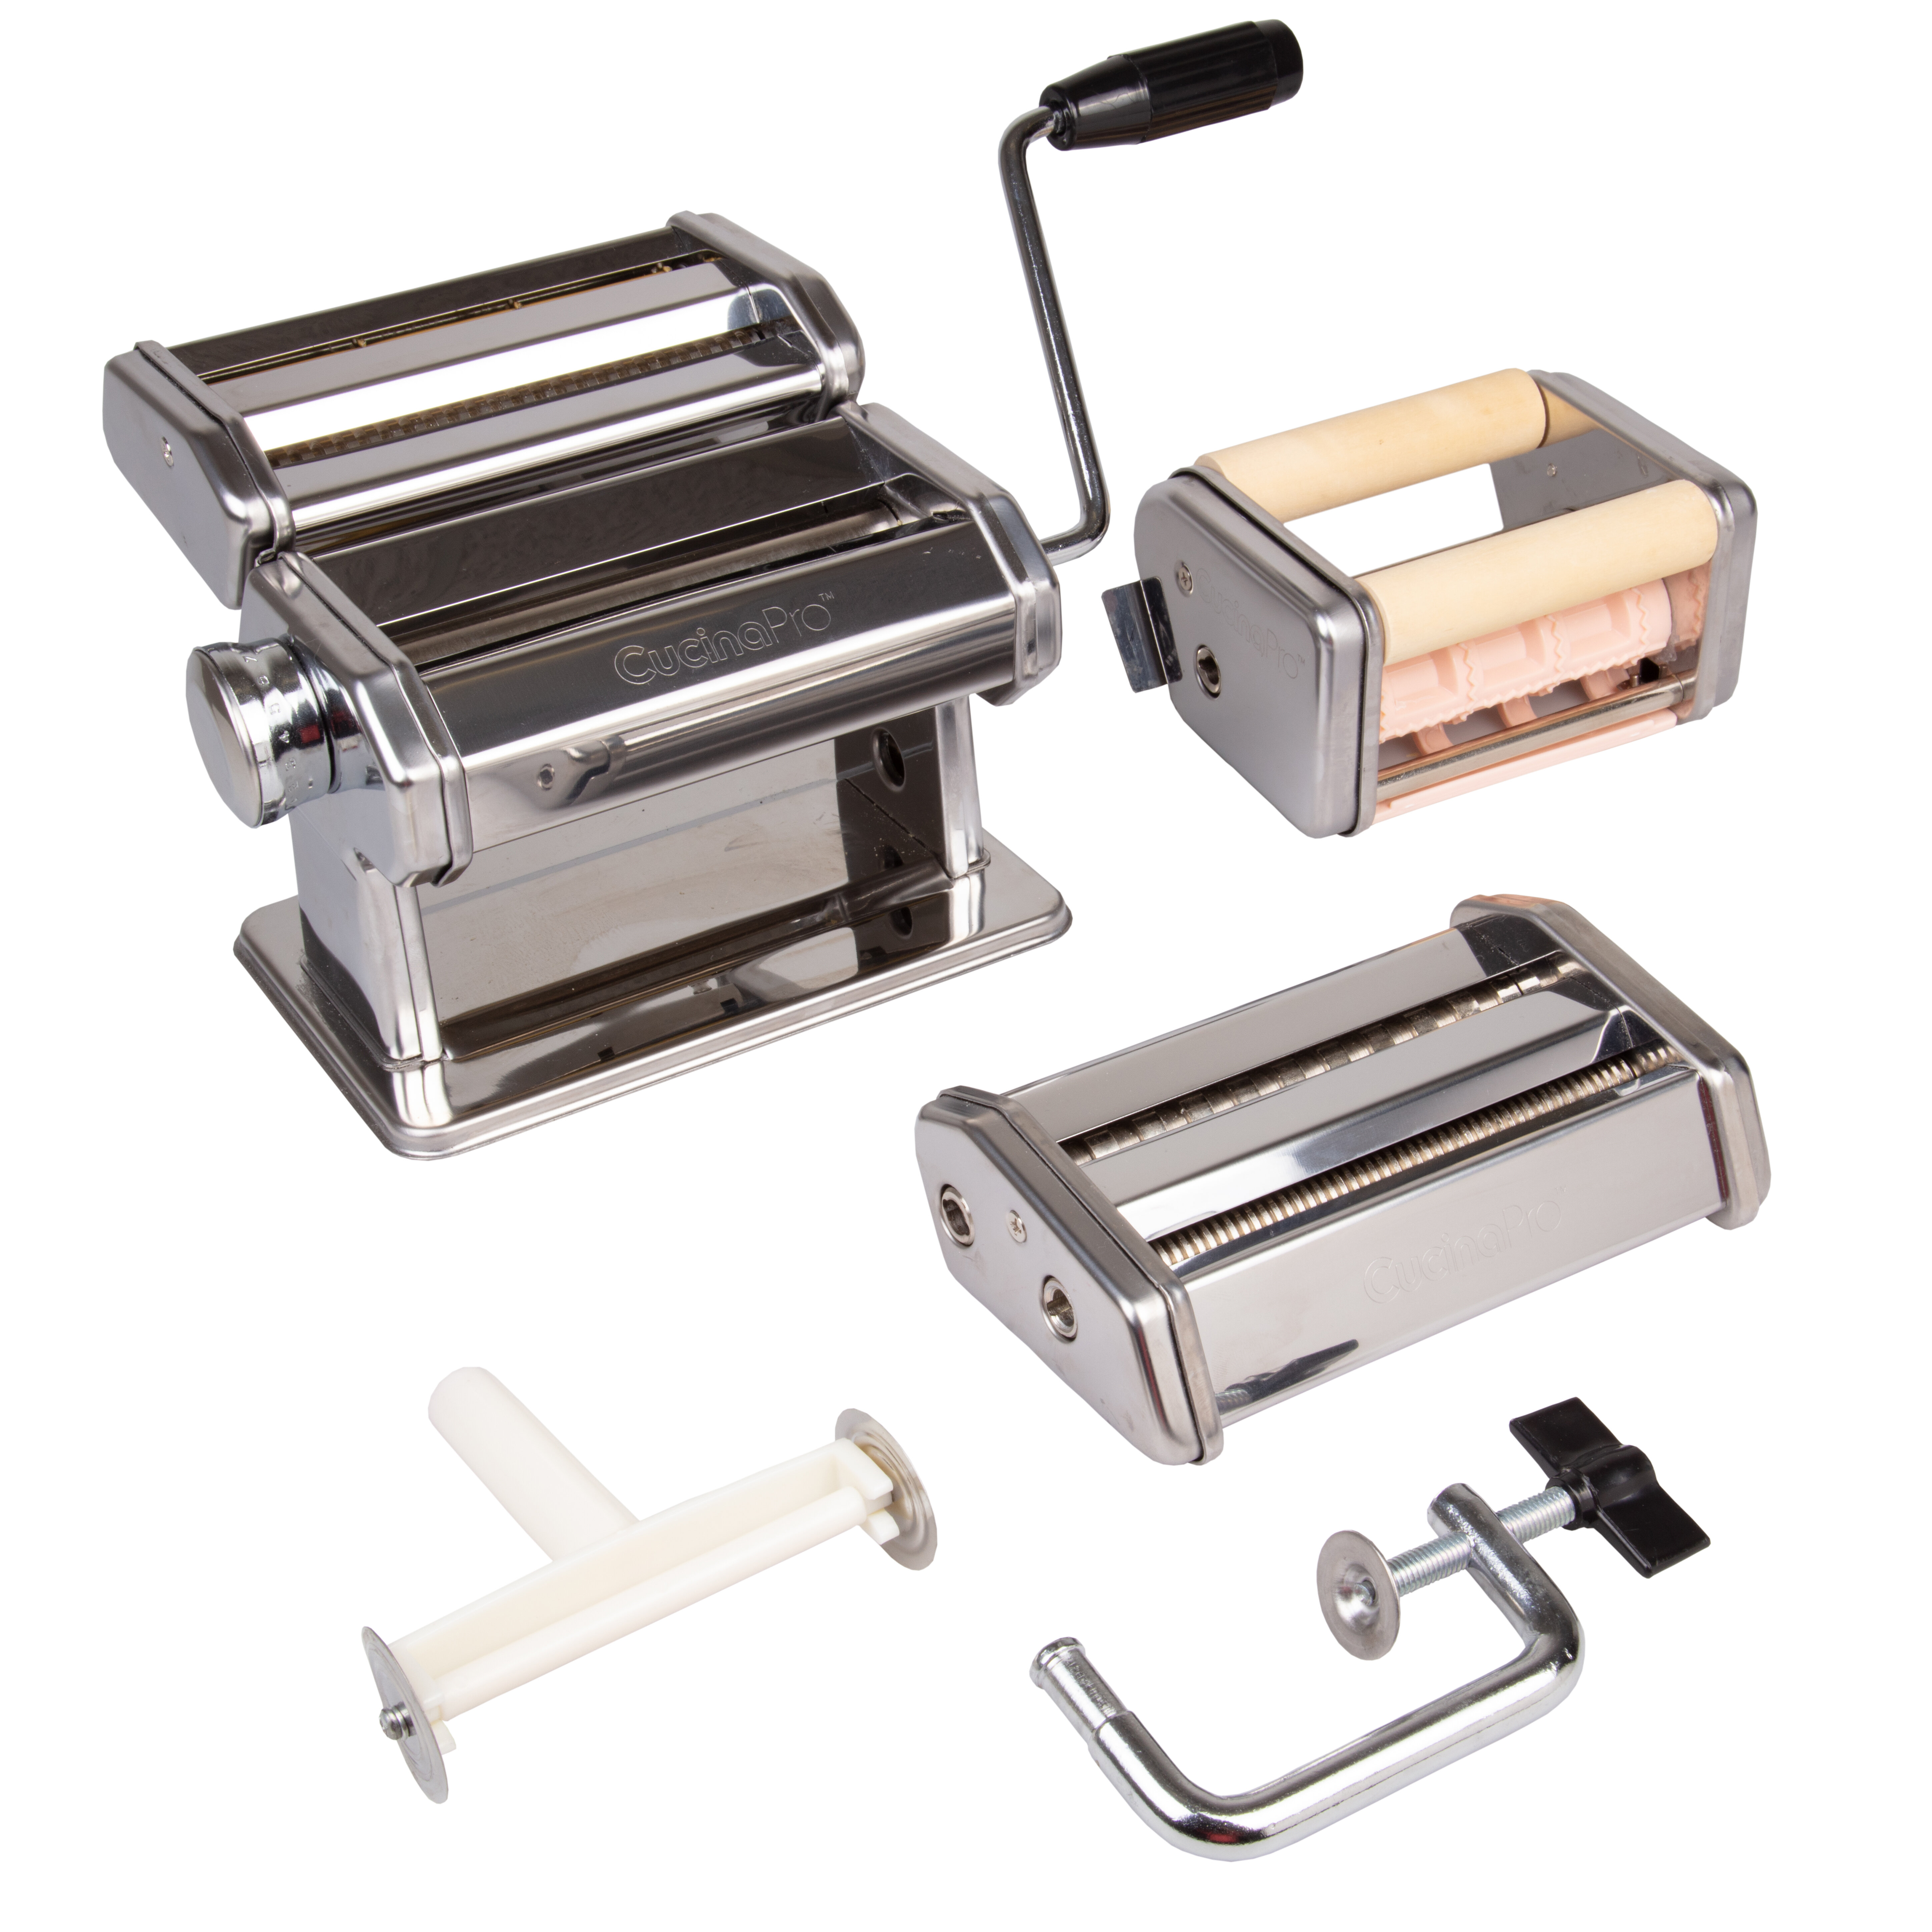 CUCINA PRO ALL STEEL FRESH PASTA MAKER Attachment Only Read